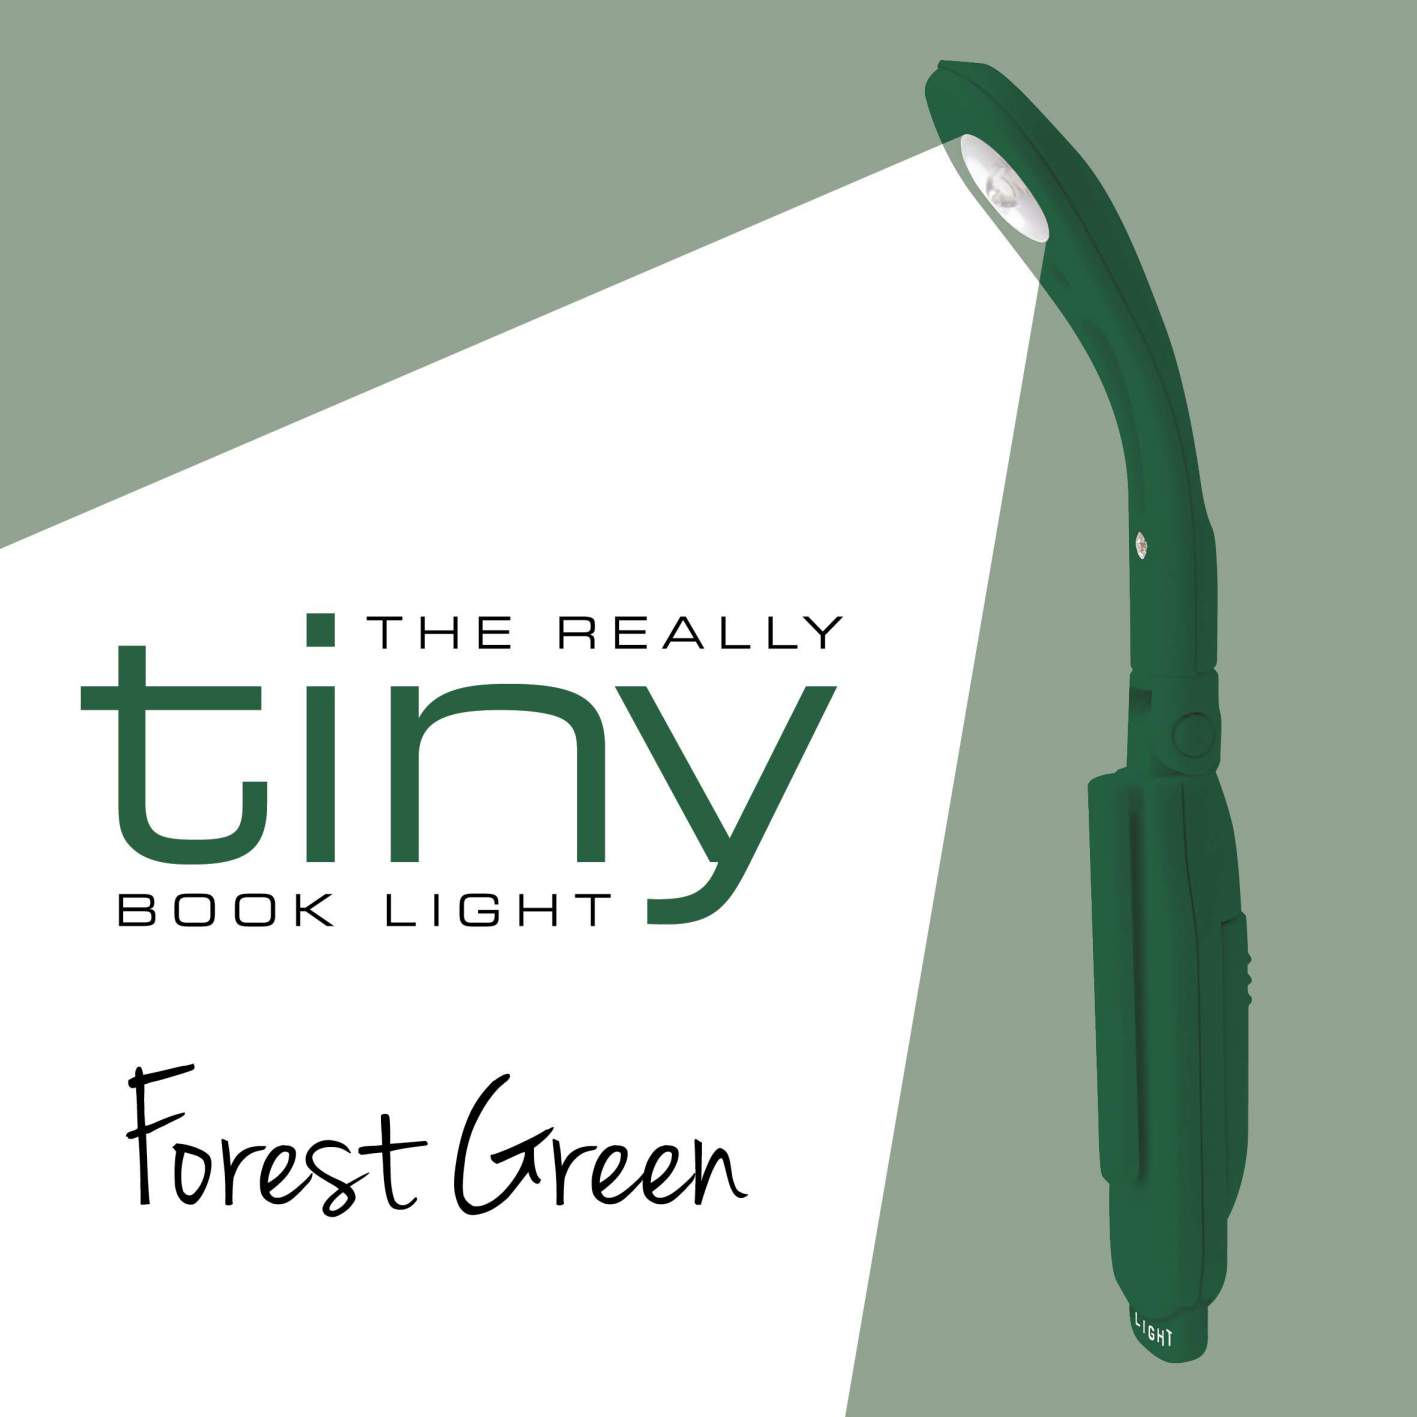 Lampa - The Really Tiny Book Light, Forest Green | If (That Company Called) image3